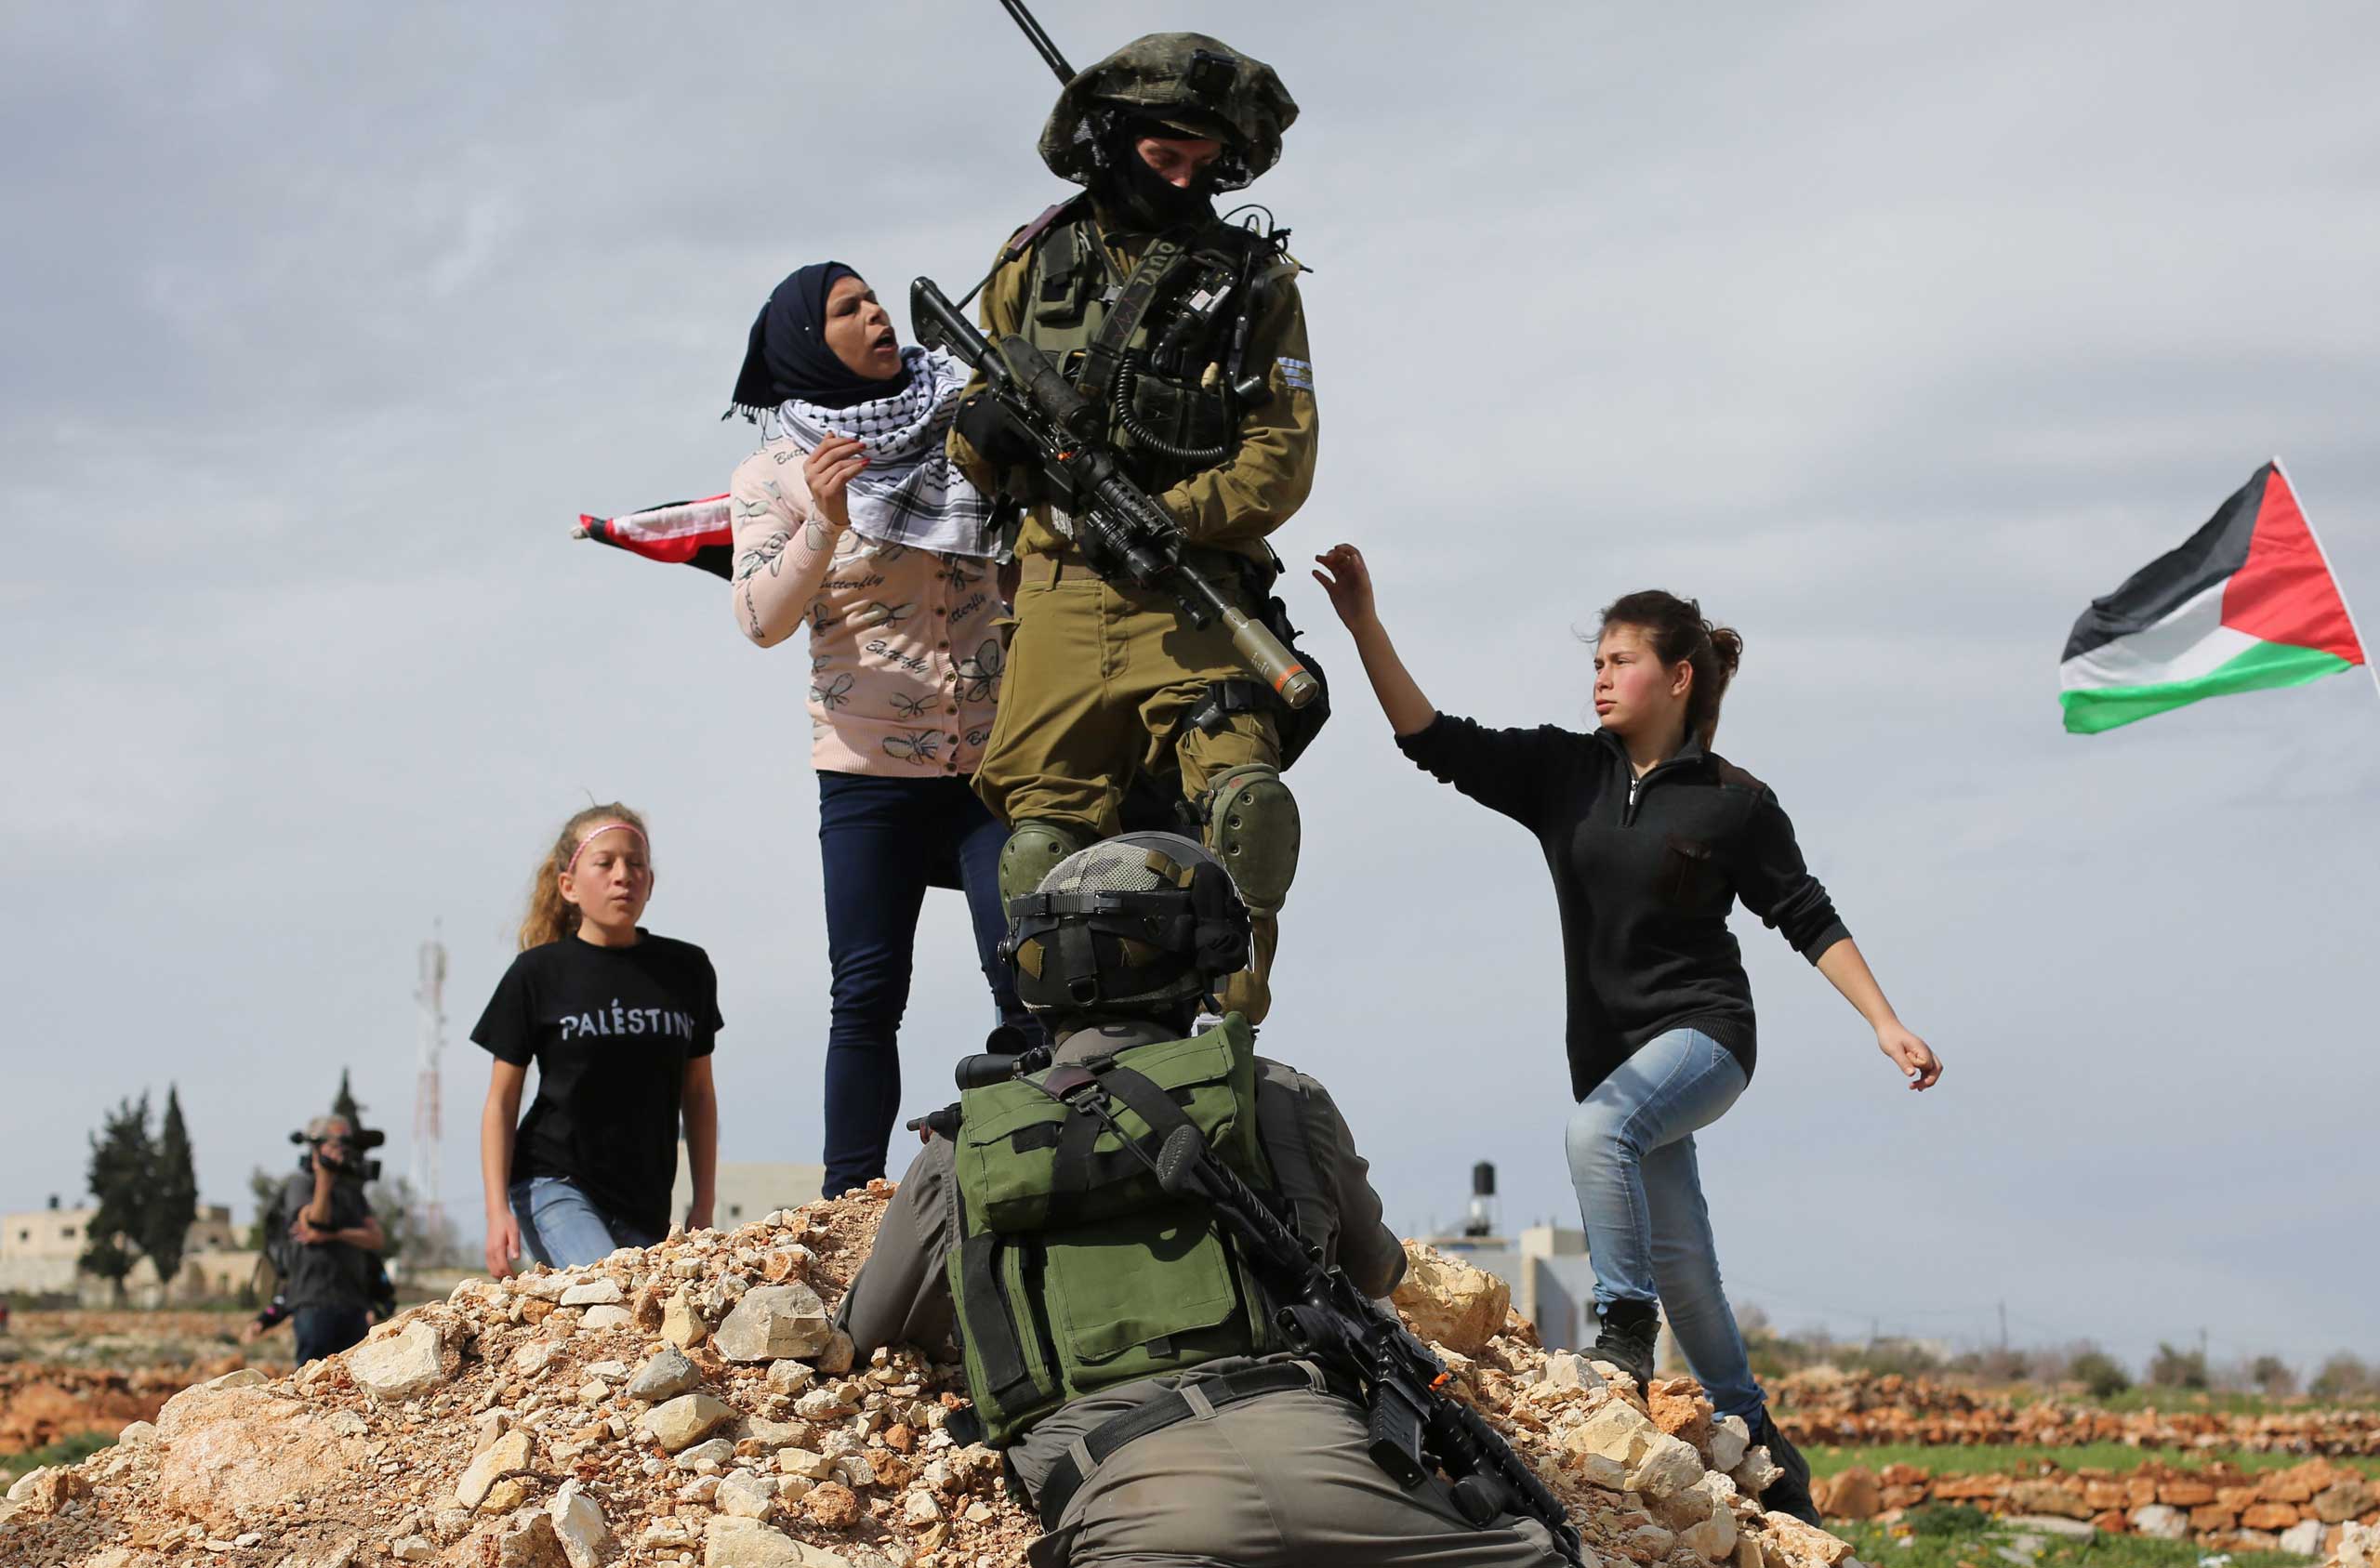 Feb. 6, 2015. Palestinian protesters scuffle with Israeli security forces during clashes following a demonstration in the West Bank village of Nabi Saleh, to protest against the expansion of Jewish settlements on Palestinian land.